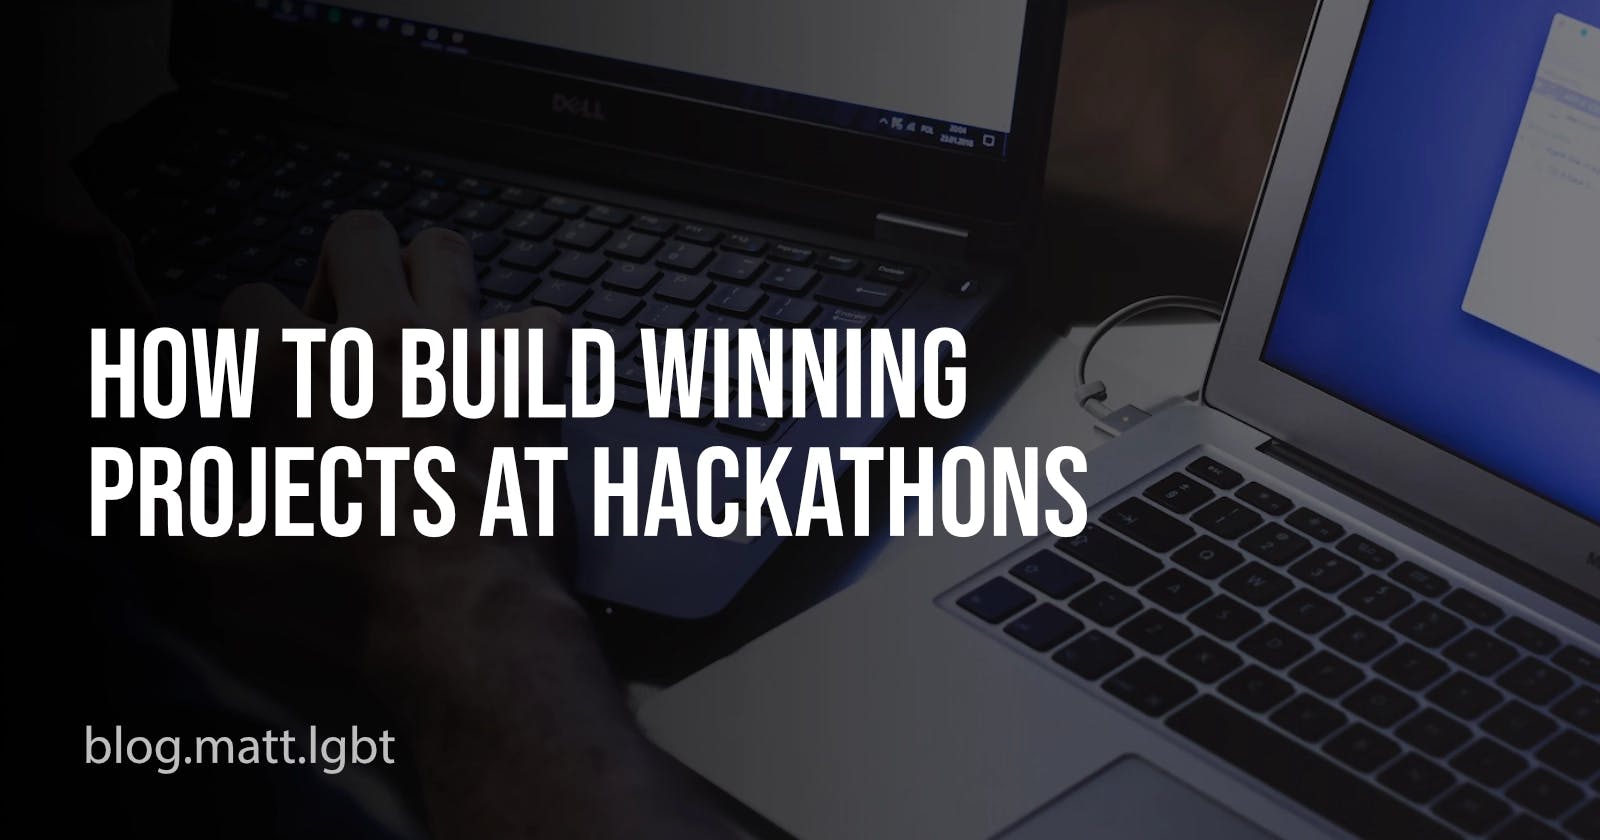 How to build winning projects at hackathons